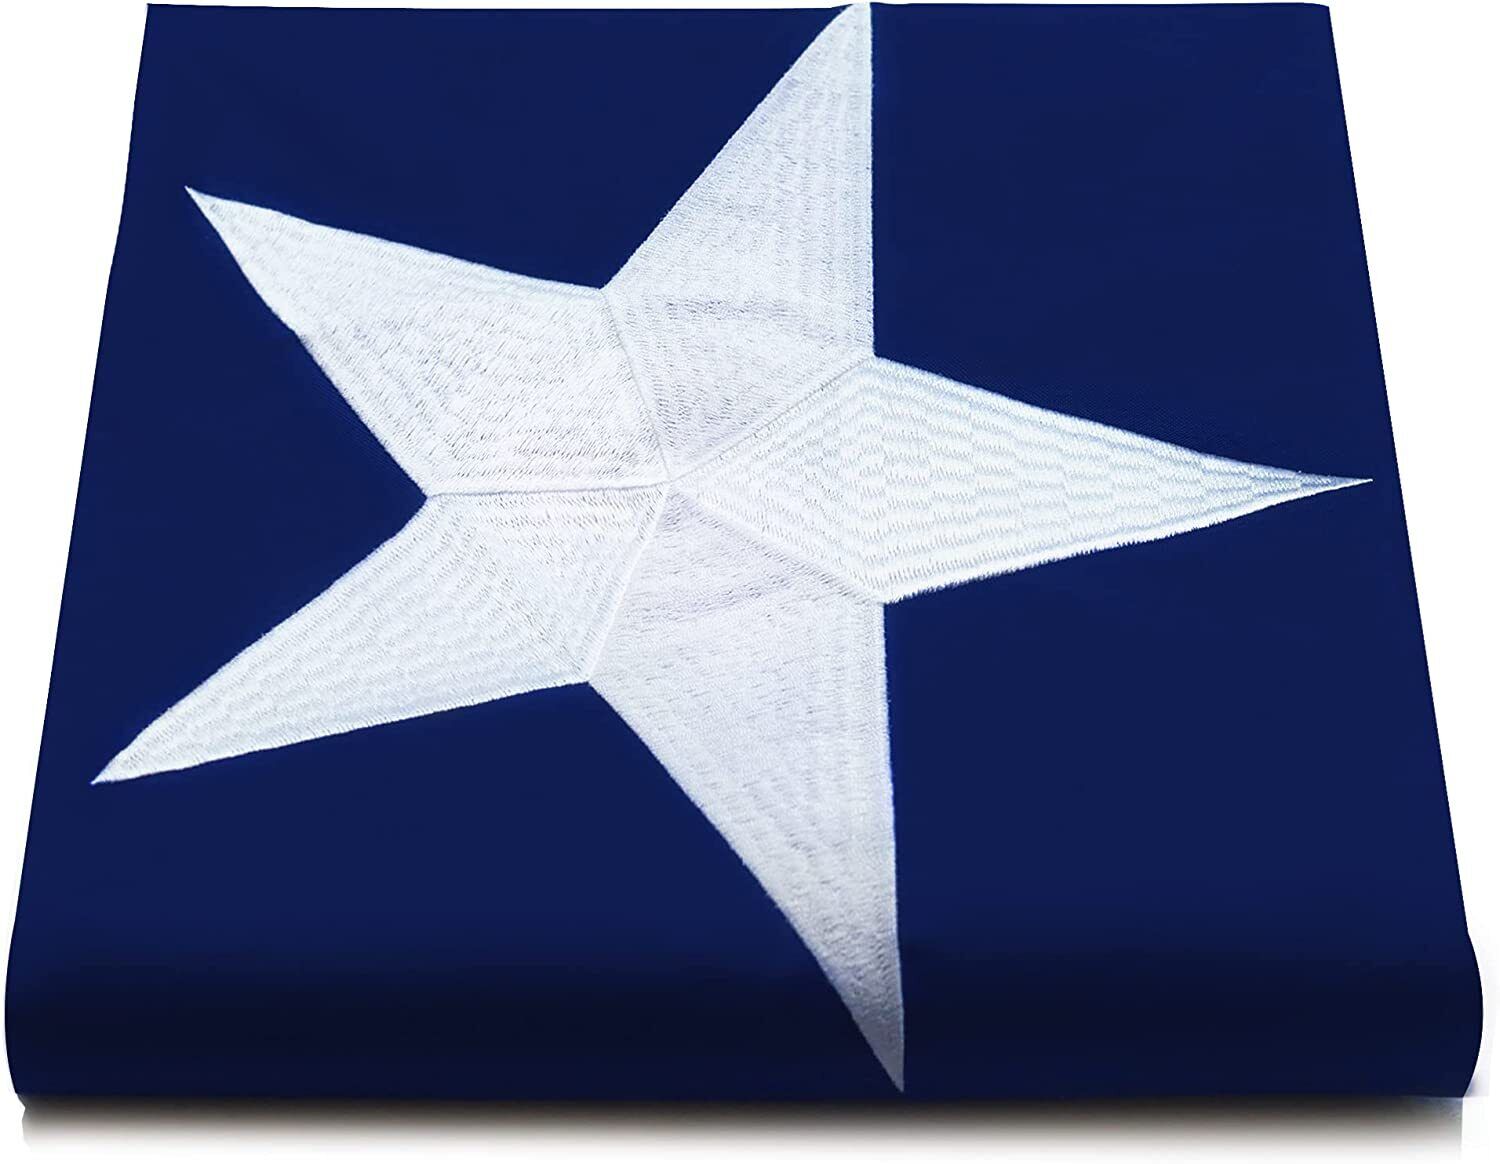 Anley Everstrong Texas State Flag 3x5 Ft Lone Star Flags Embroidered Nylon